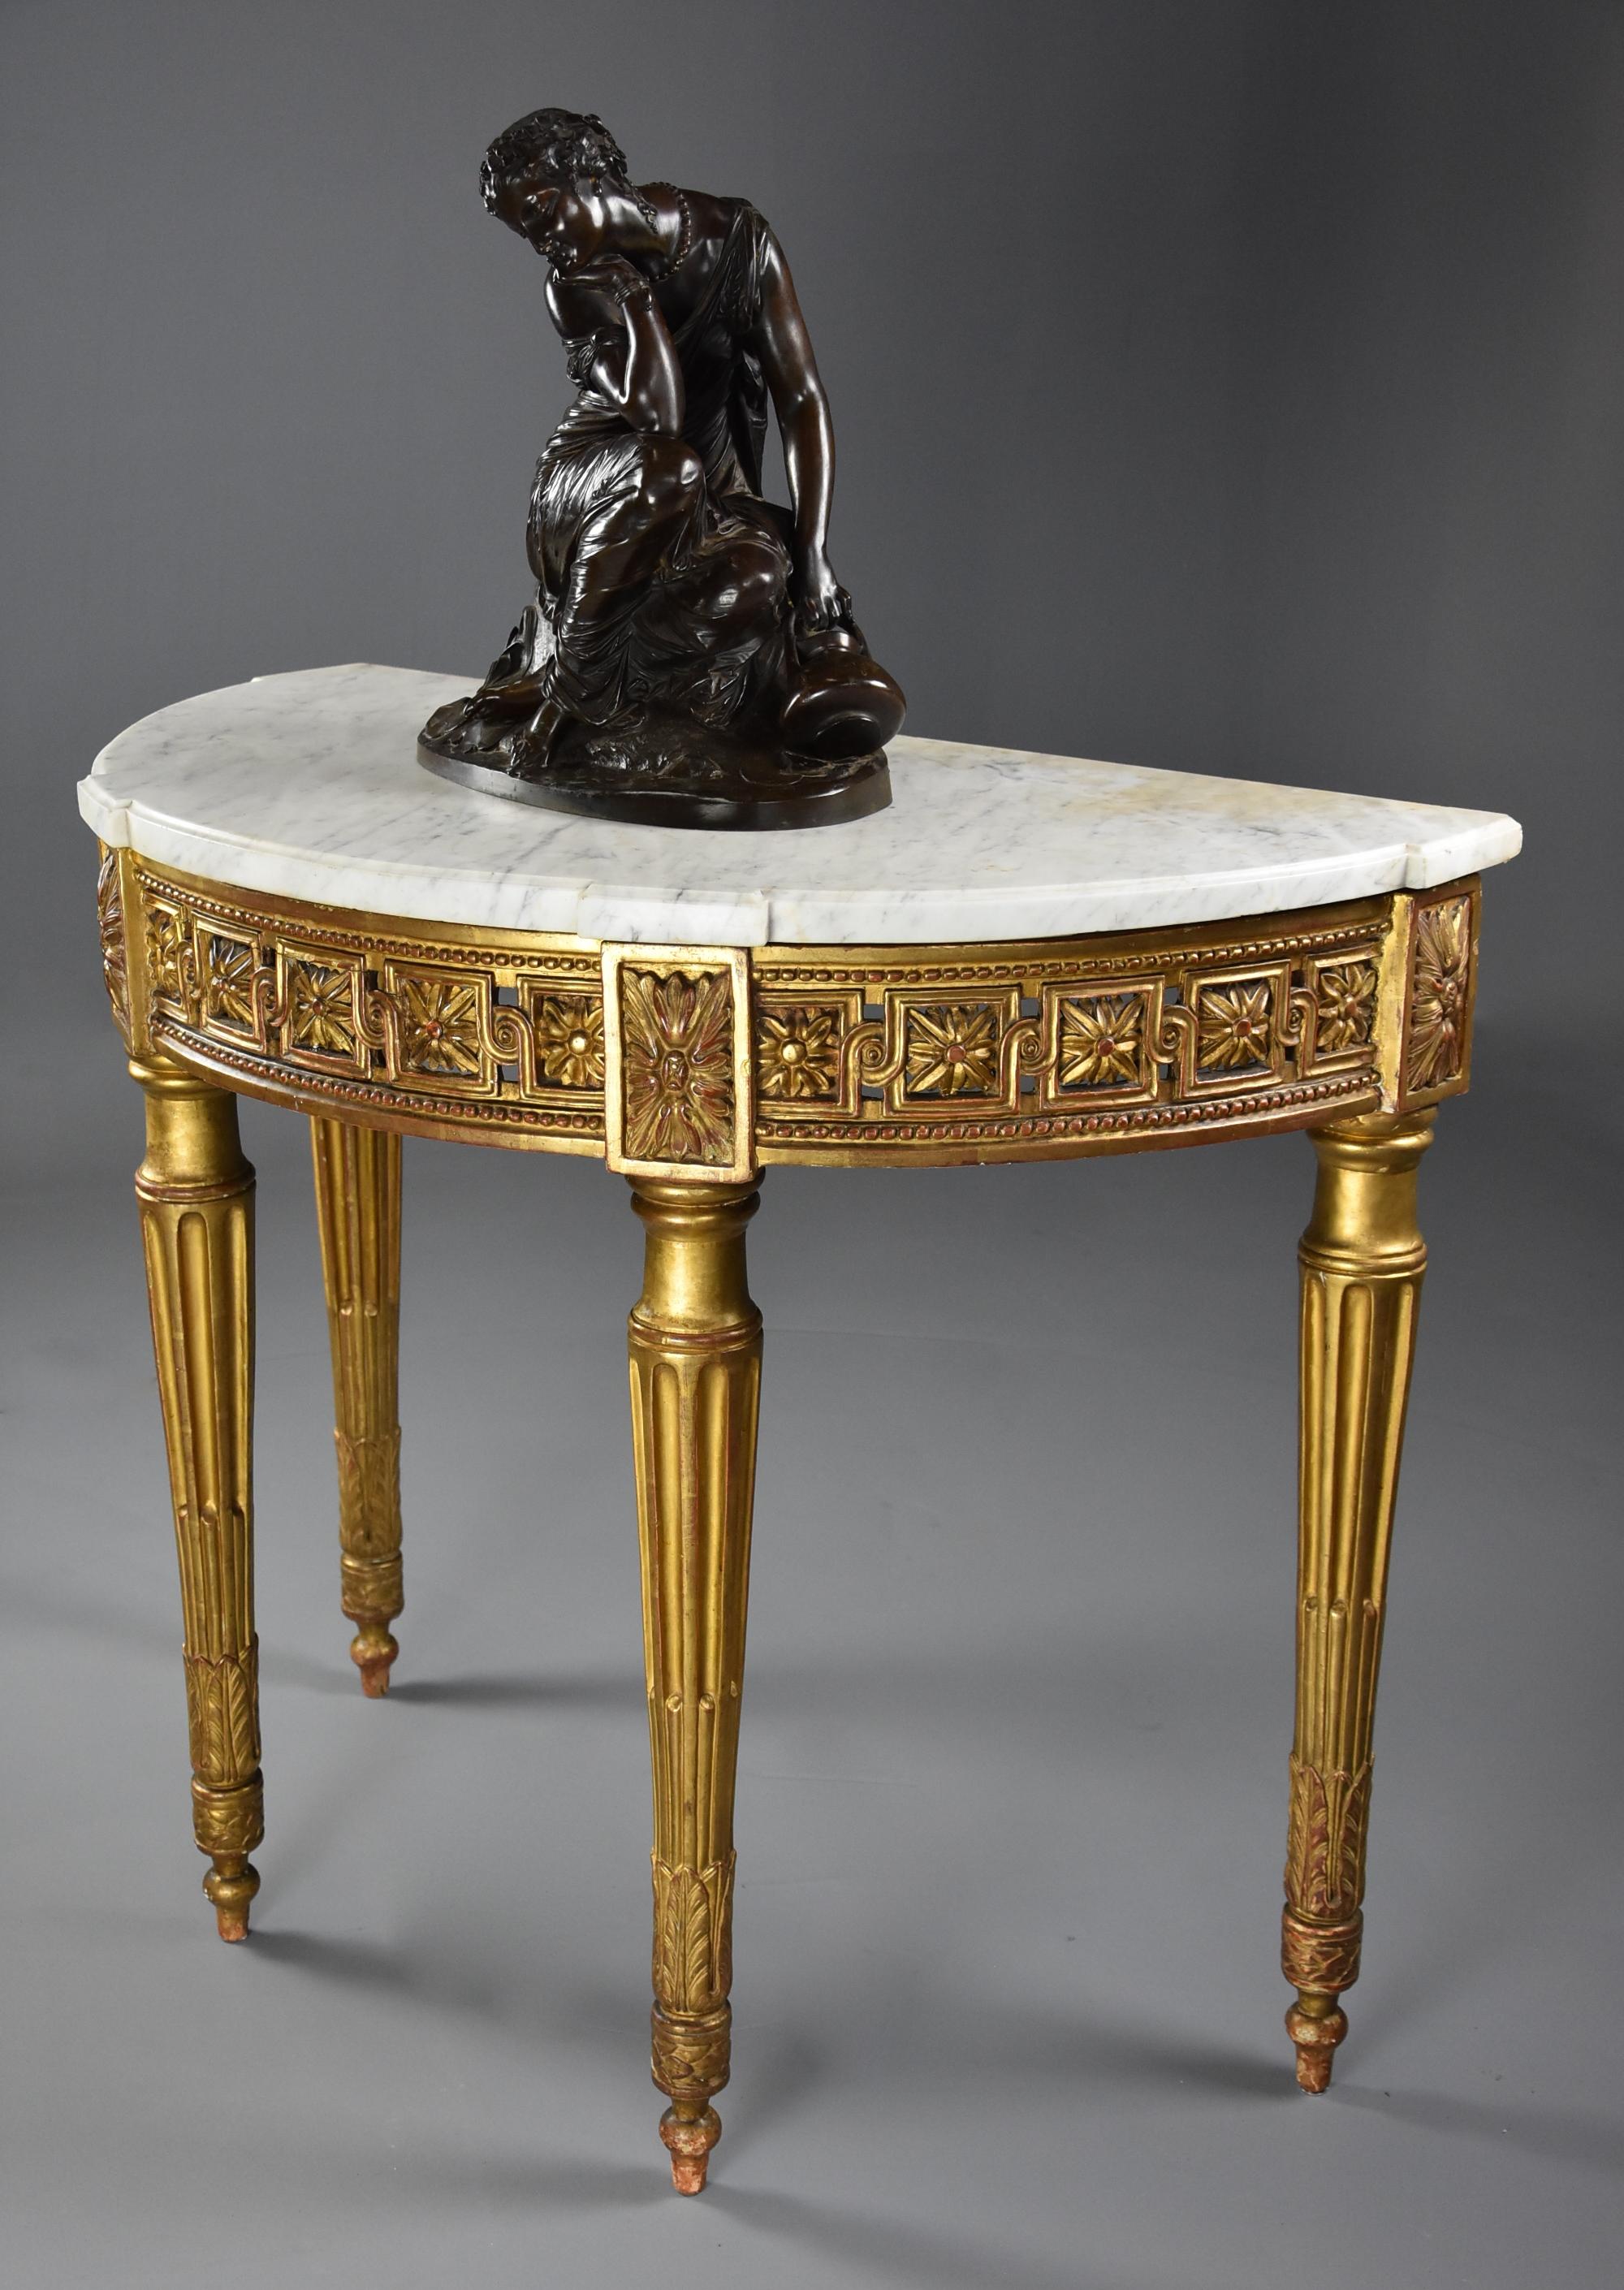 Highly Decorative 19th Century French Demilune Gilt Console Table In Good Condition For Sale In Suffolk, GB